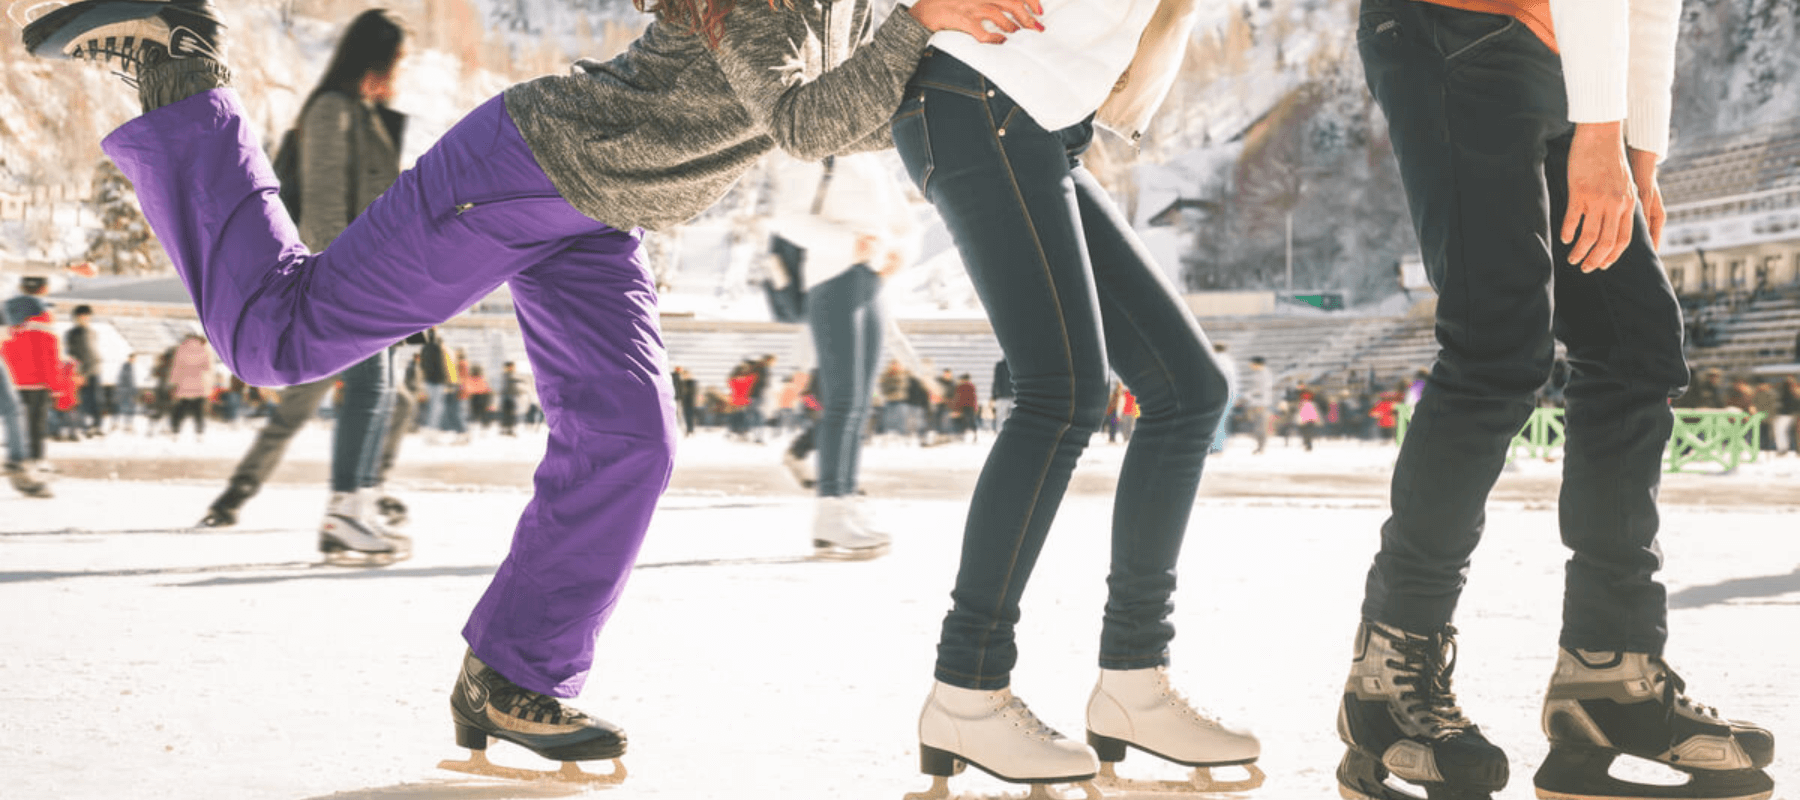 group of ice skaters at an ice rink